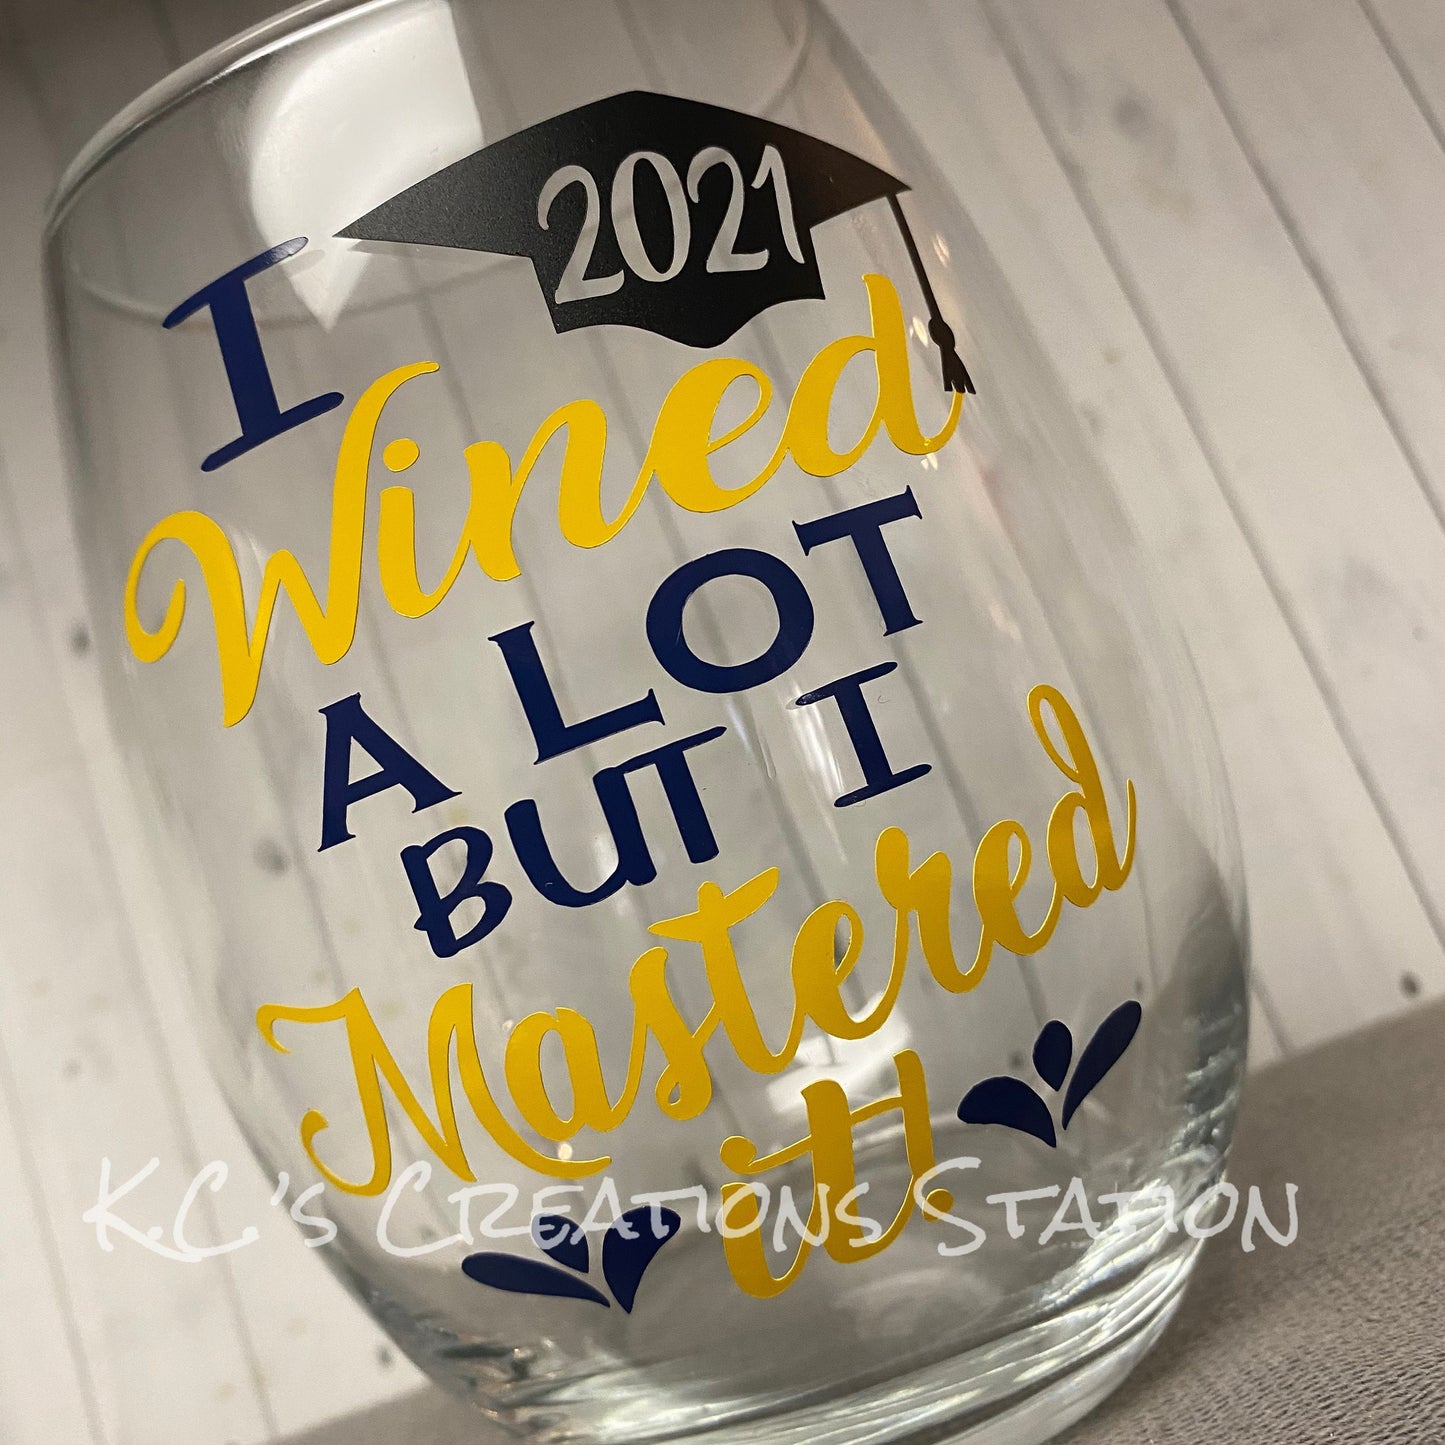 I wined a lot but I mastered it wine glass, college graduation gift, funny graduation gift, personalized grad gift, class of 2021